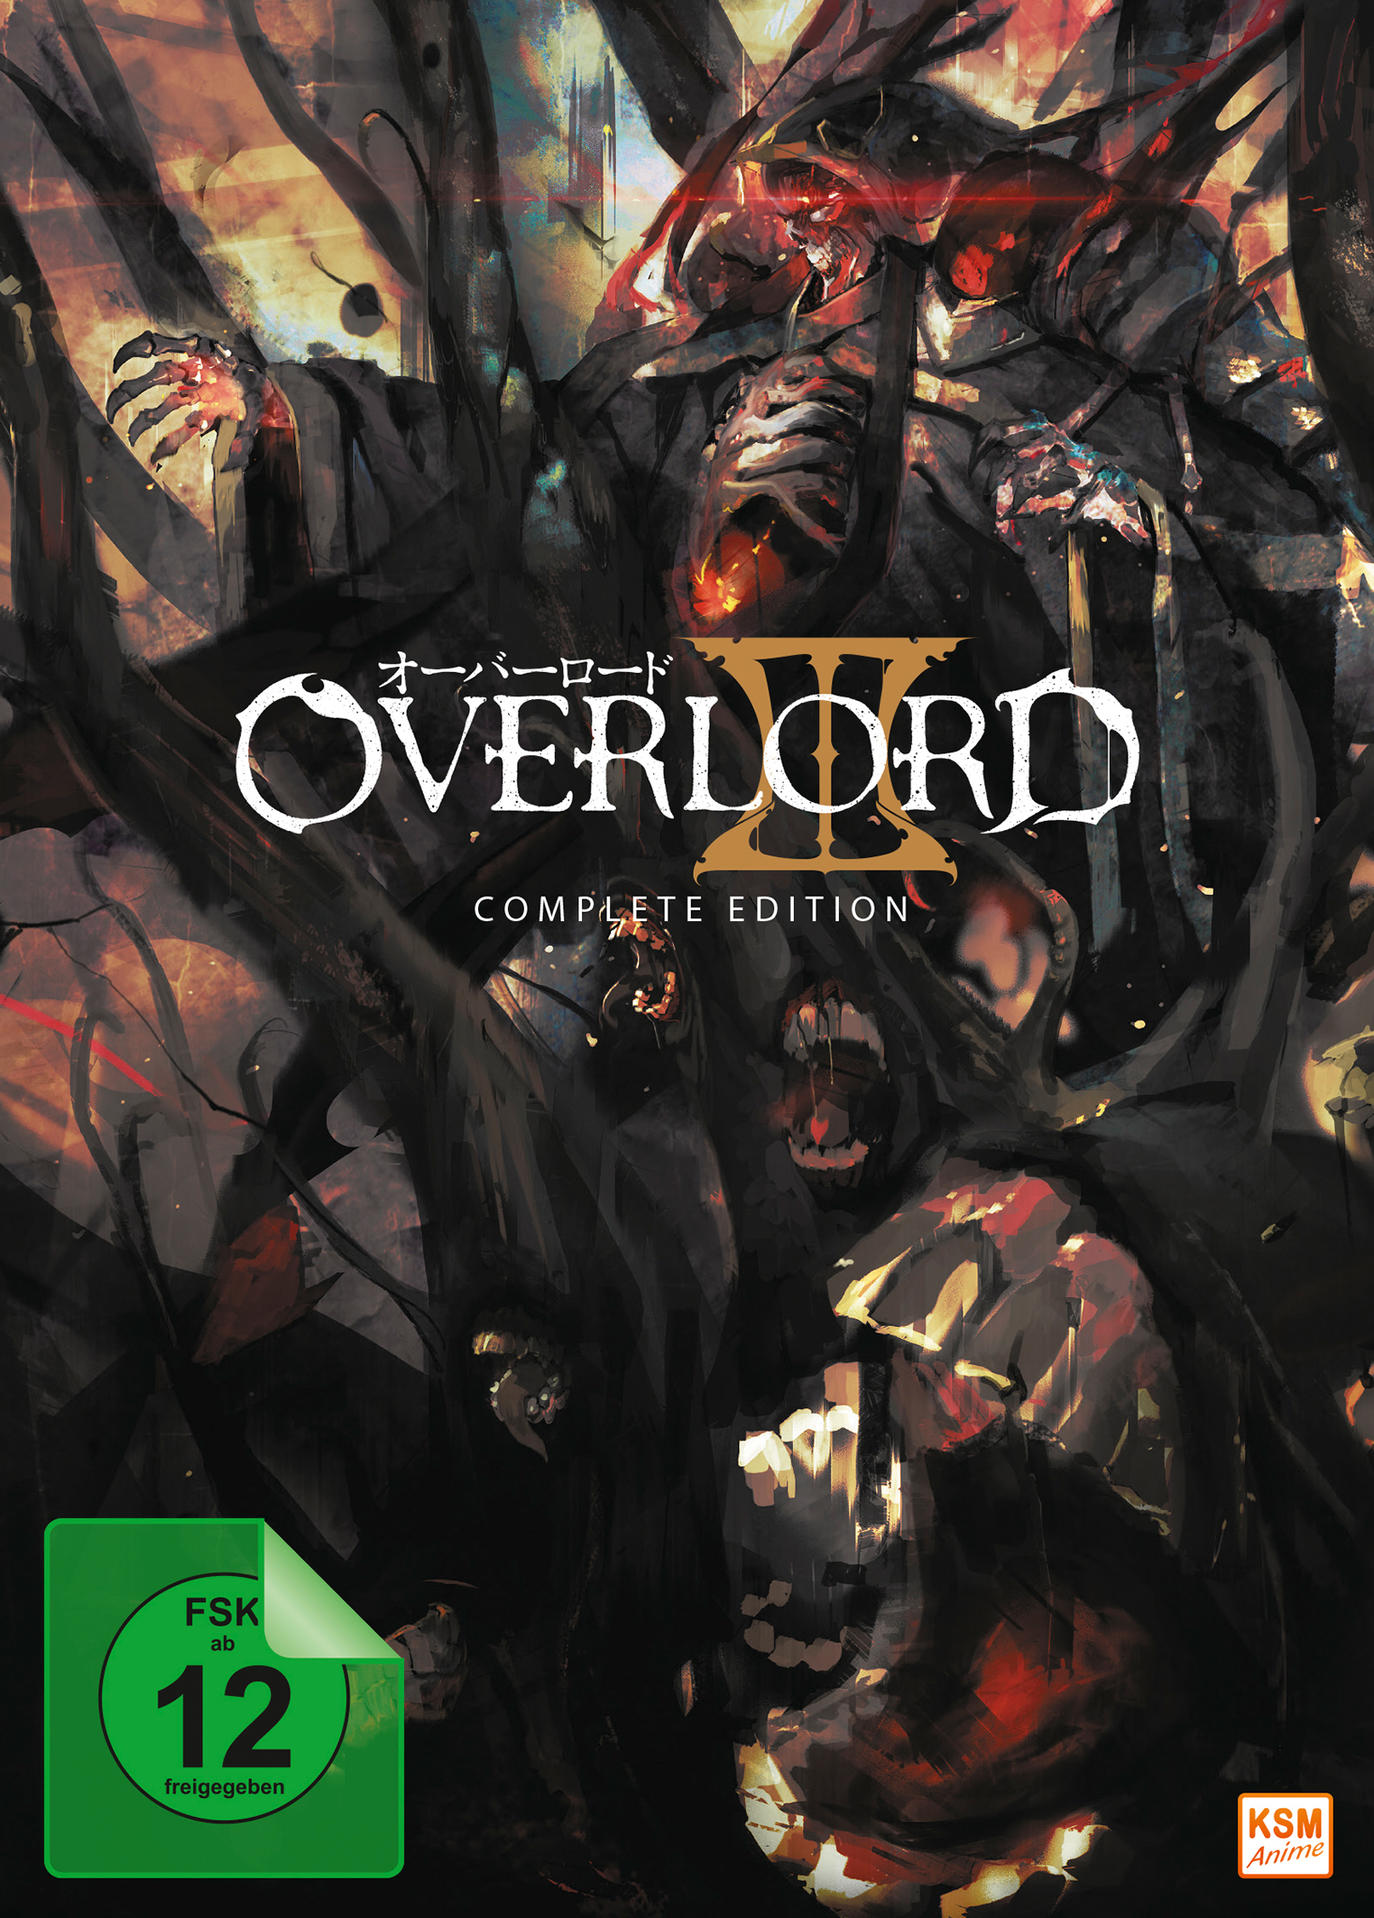 - 3 - Edition Complete Overlord Staffel DVD